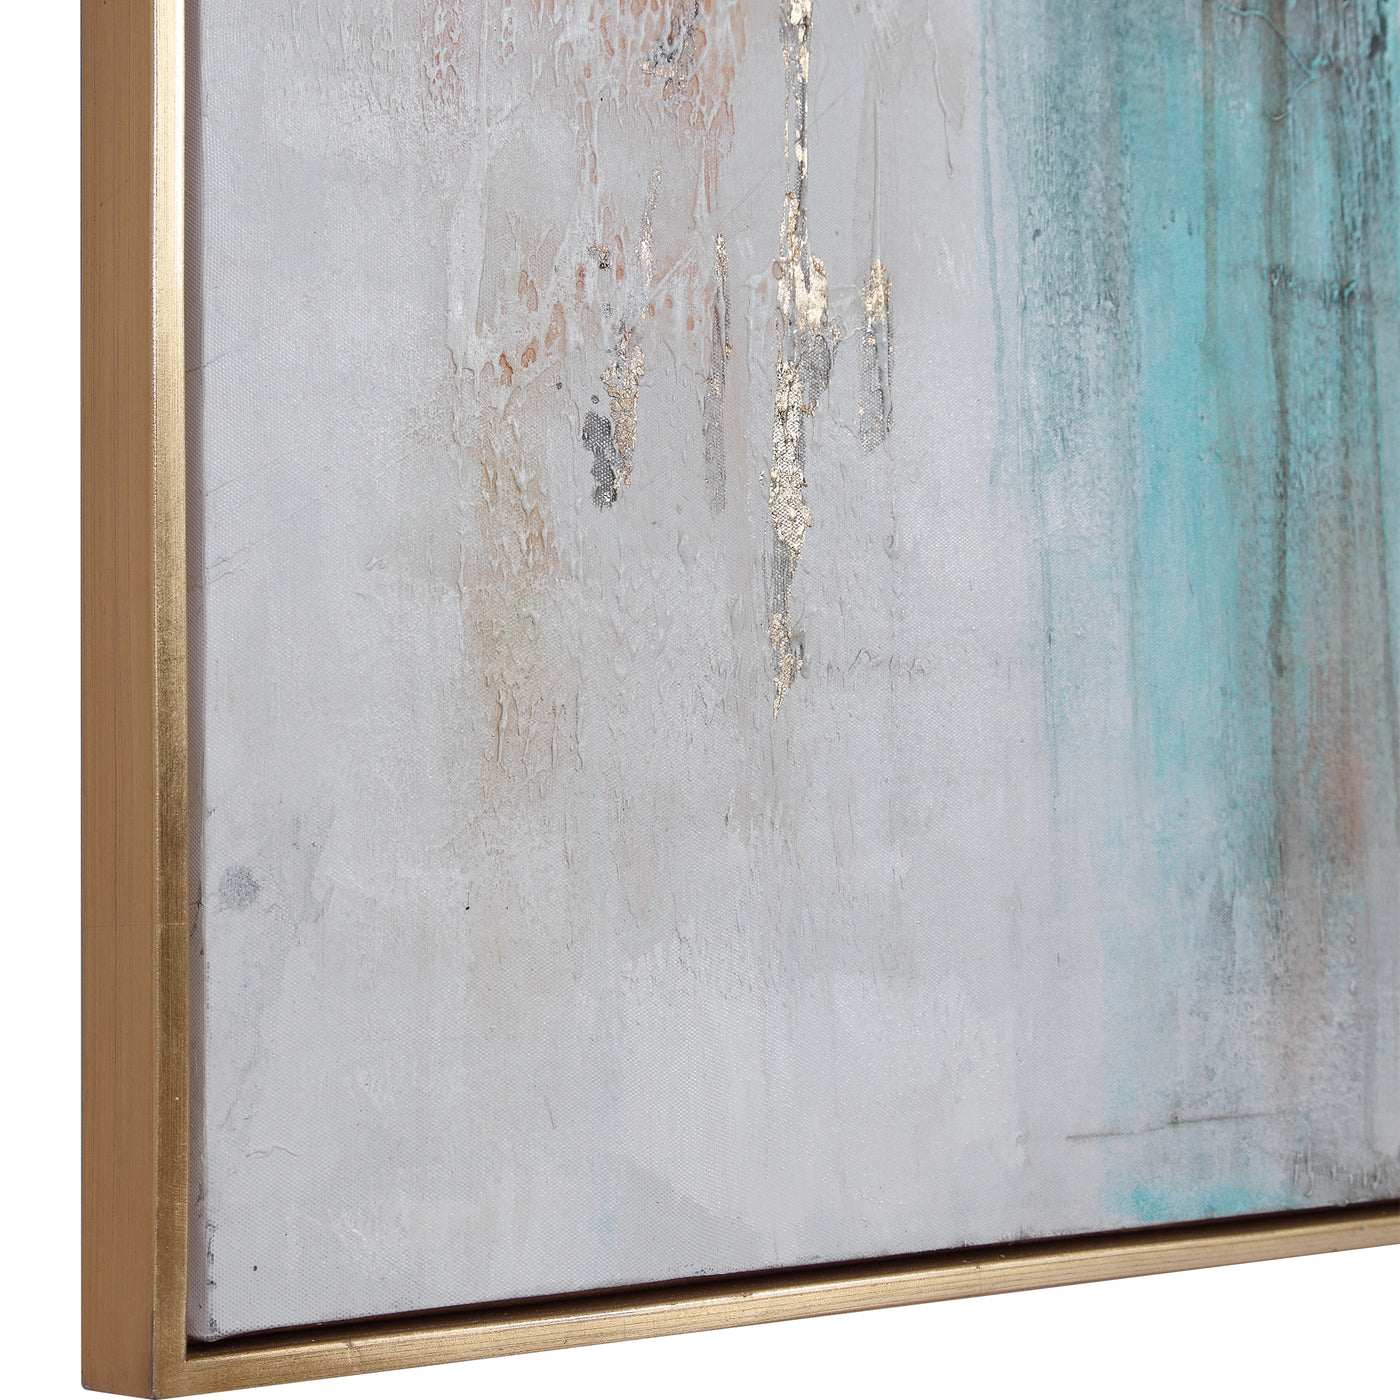 Hand Painted On Canvas, This Abstract Artwork Features Bright Teal And Charcoal Tones With Burnt Orange And Gold Leaf High...